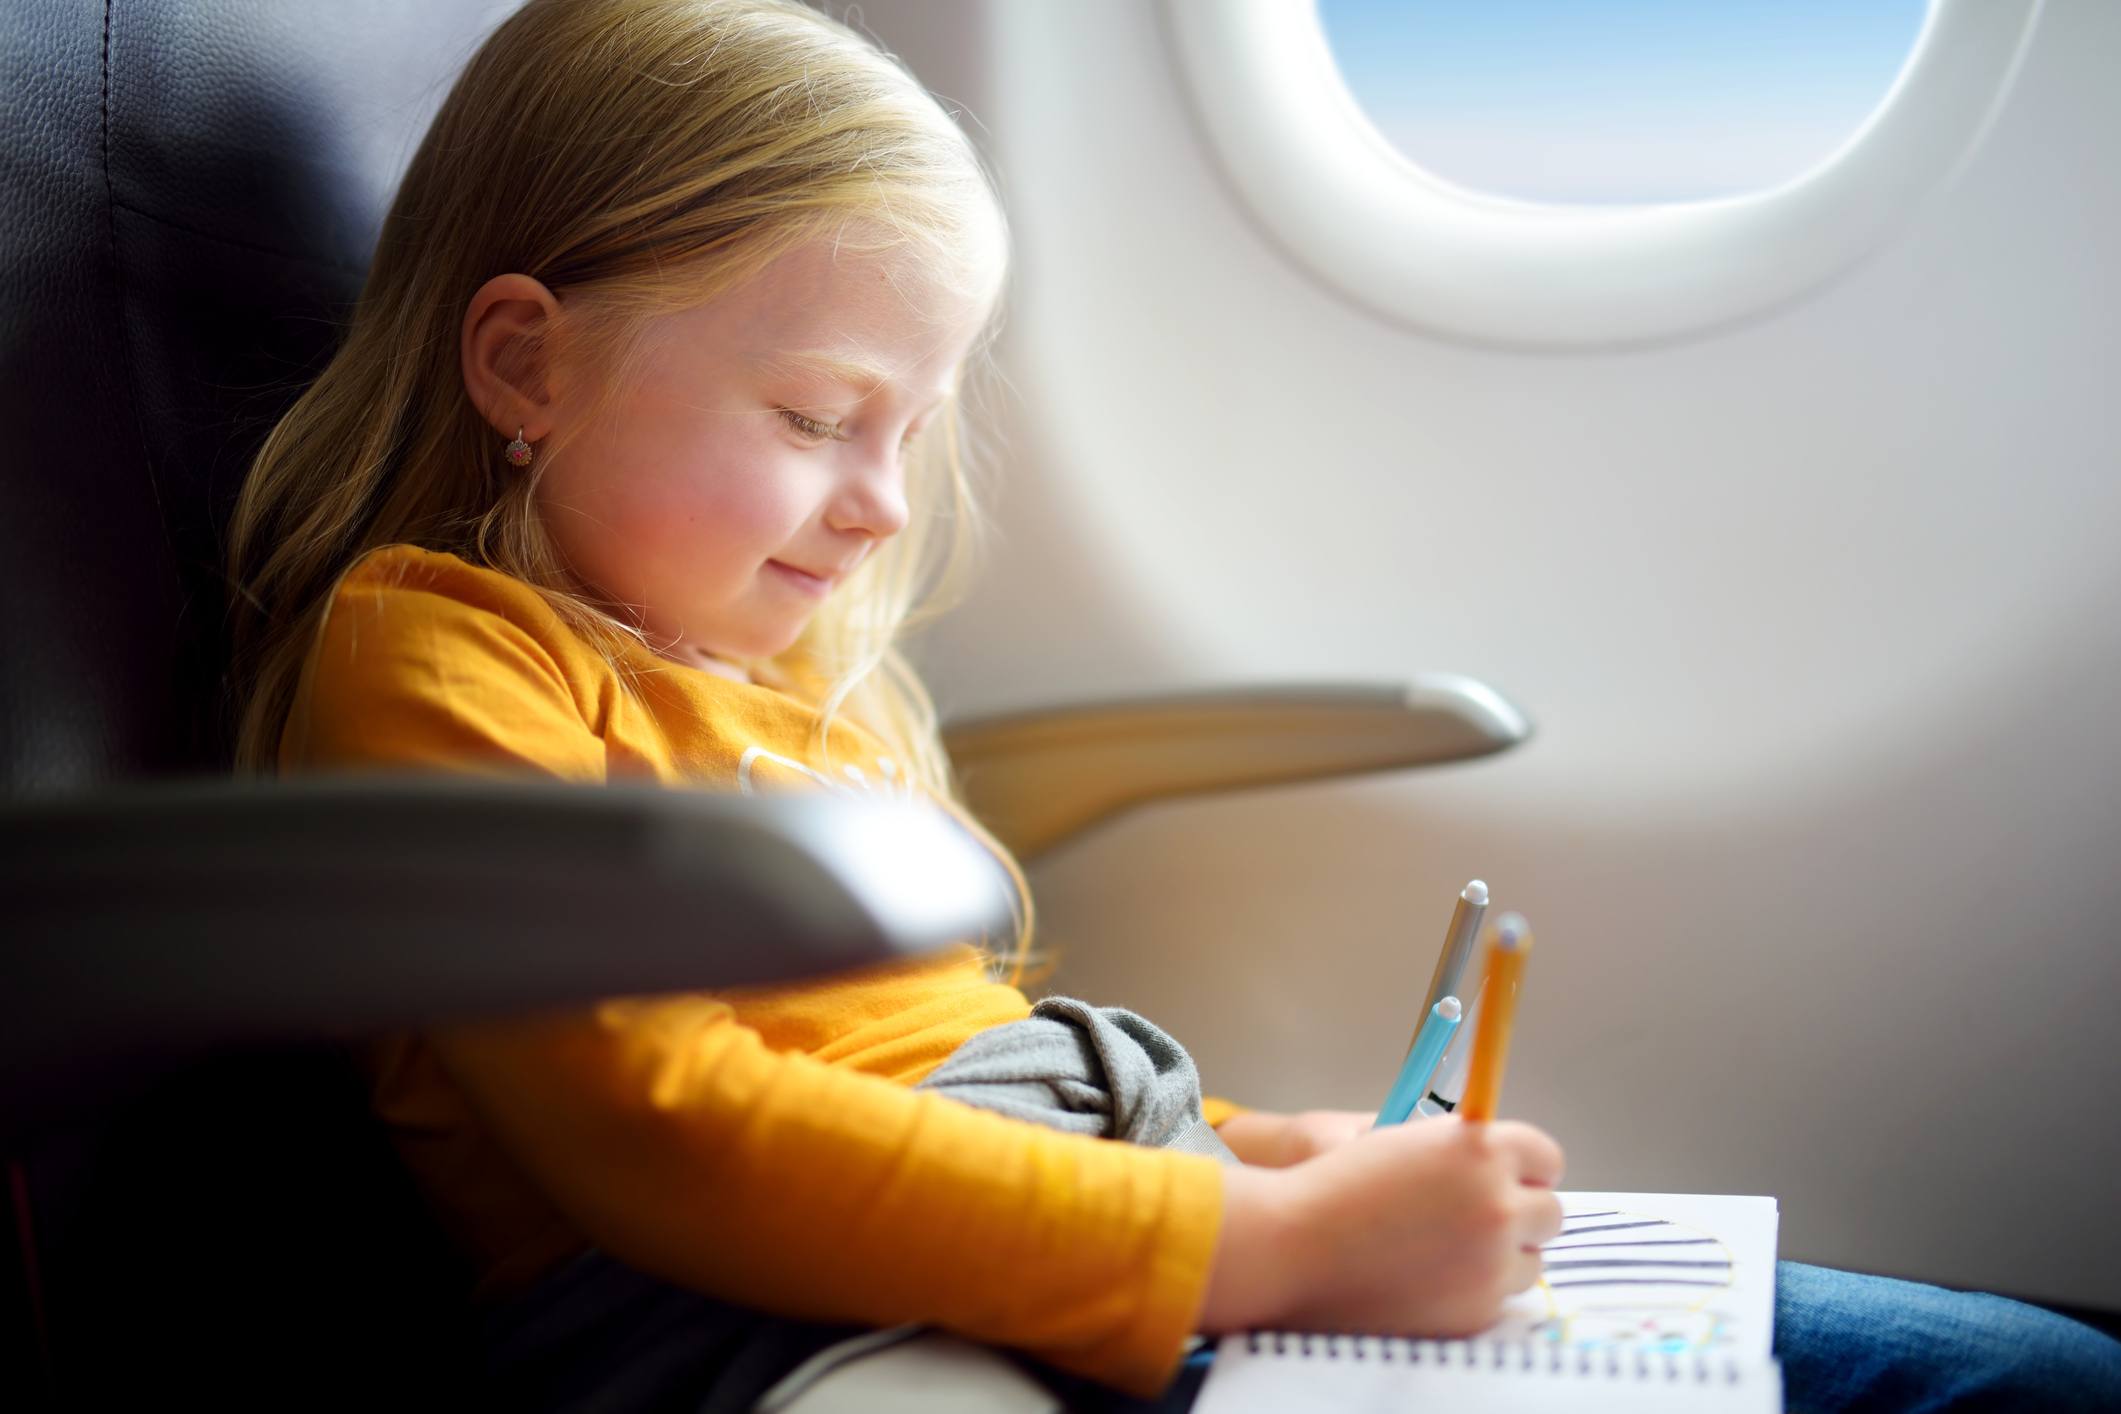 Adorable little girl traveling by an airplane. Child sitting by aircraft window and drawing or coloring a picture with felt-tip pens.